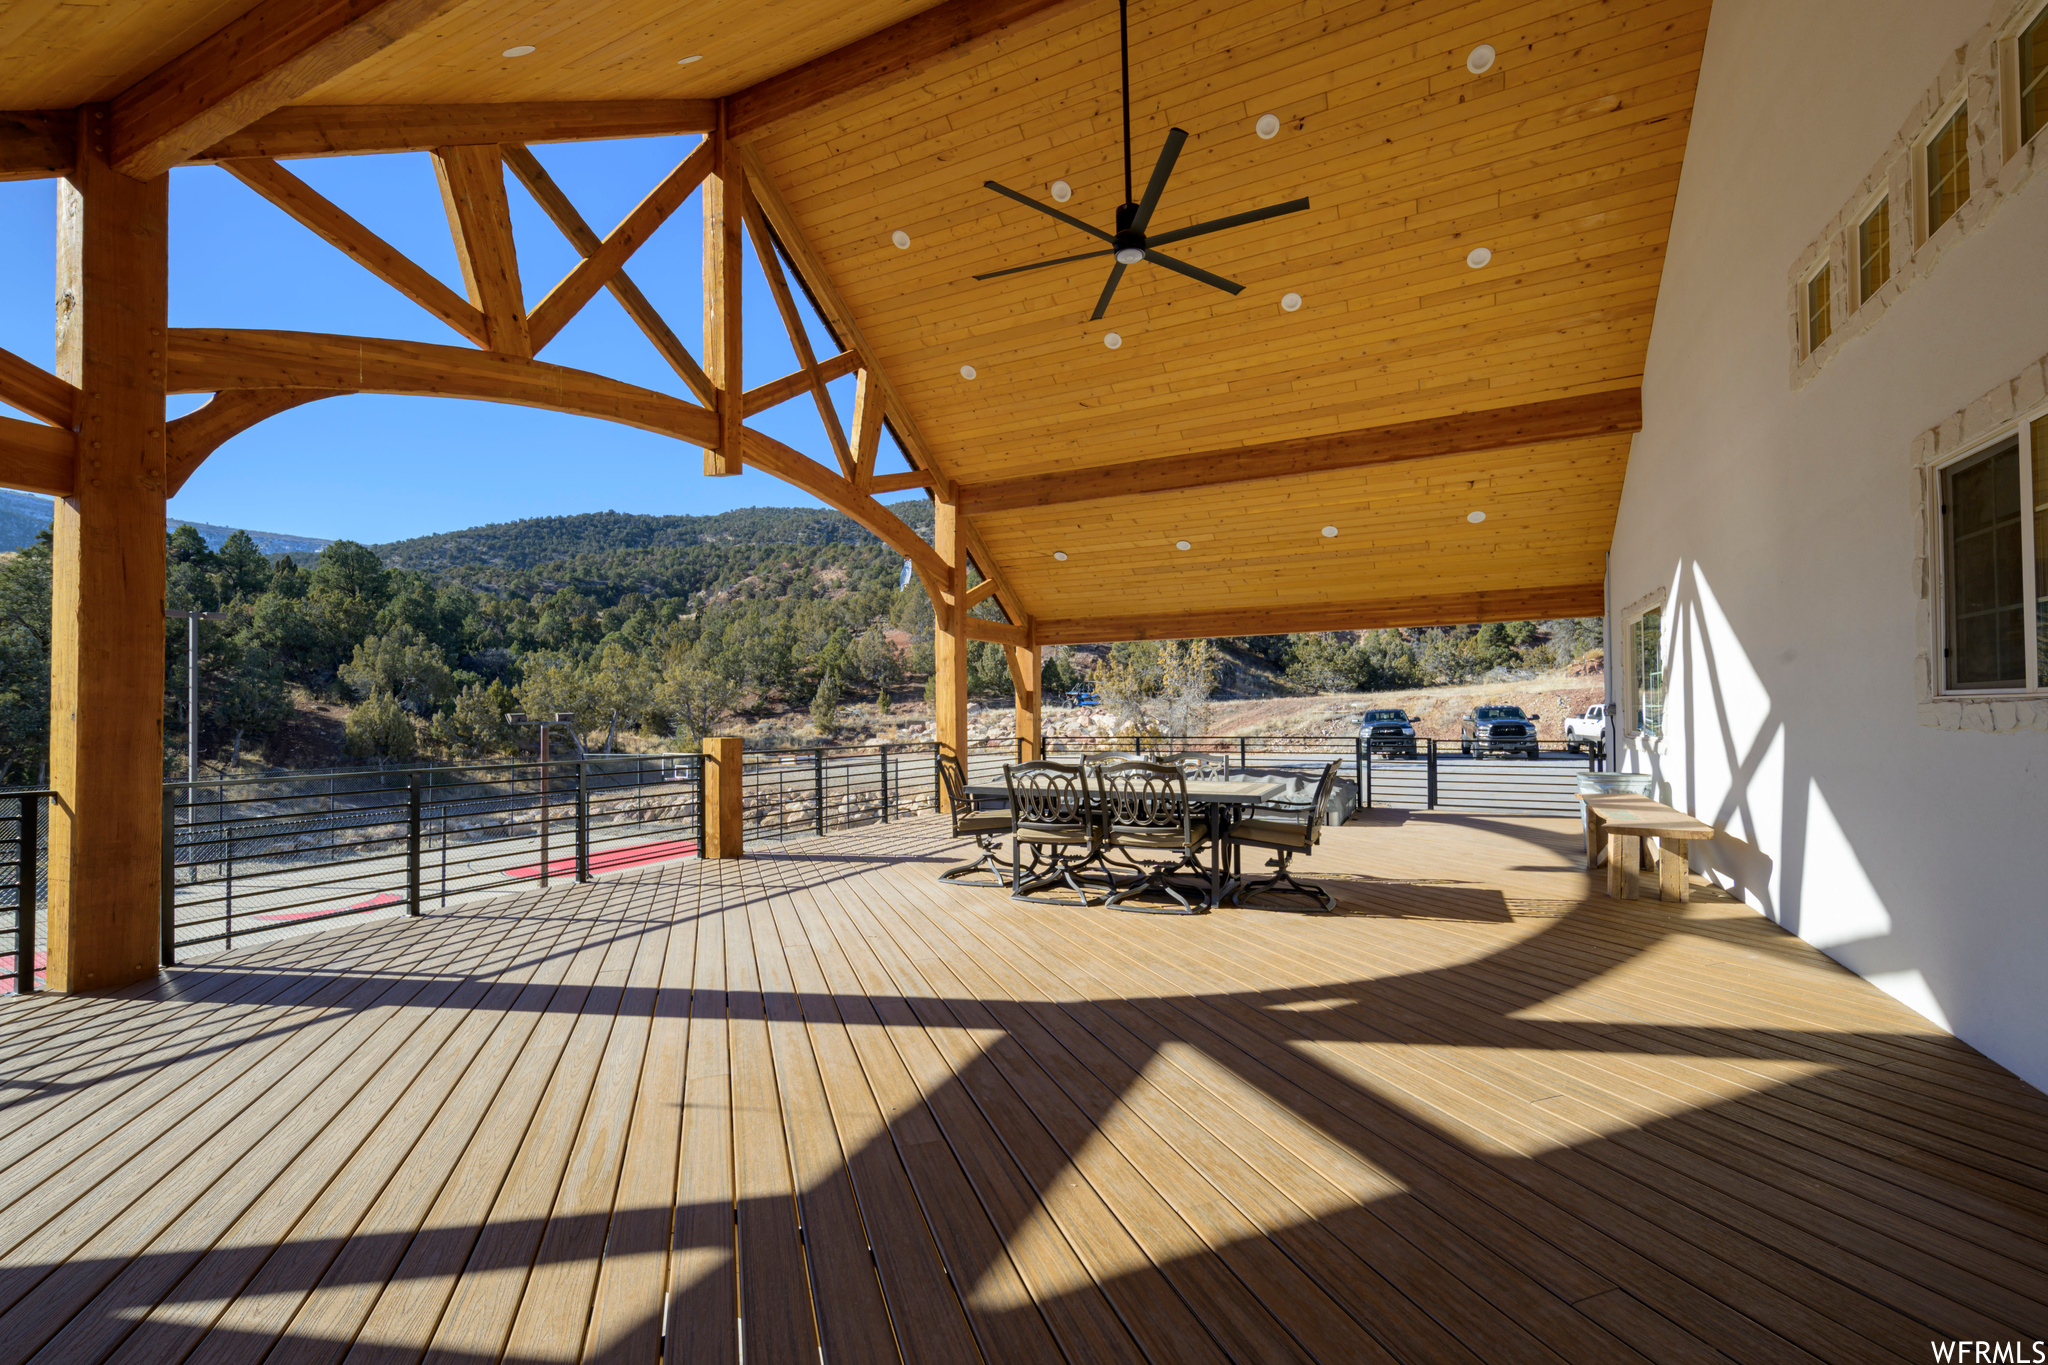 Deck with ceiling fan and a mountain view